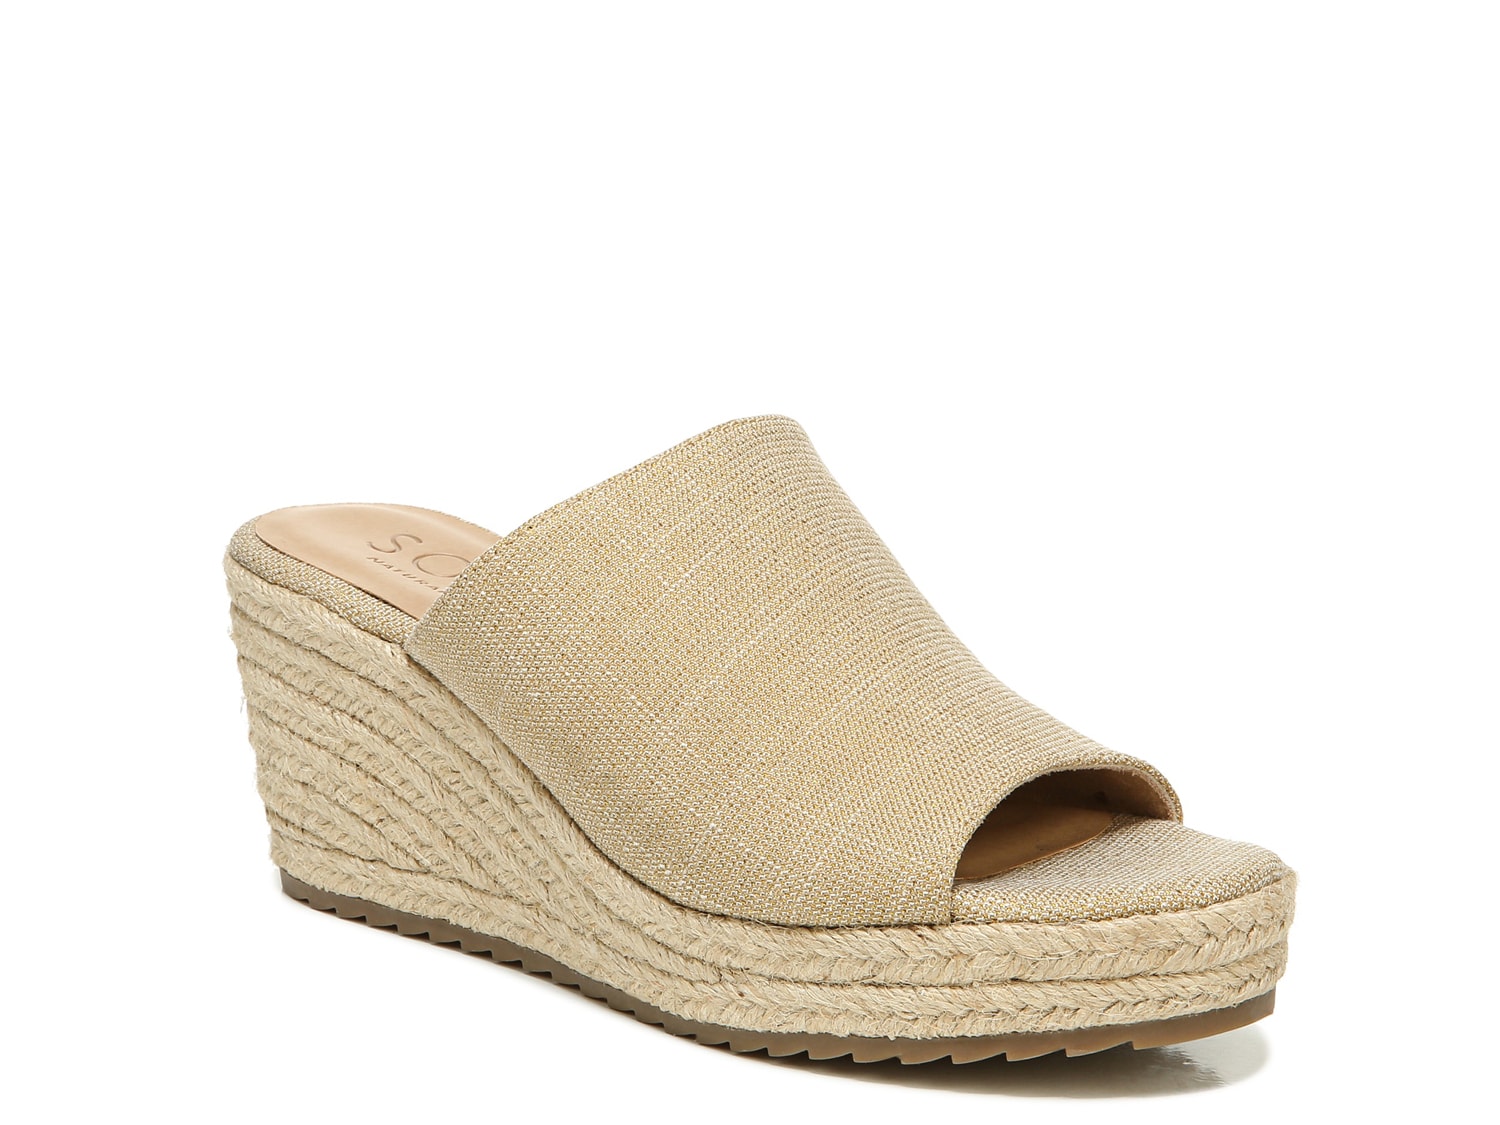 SOUL Naturalizer Oodles Espadrille Wedge Sandal - Free Shipping | DSW